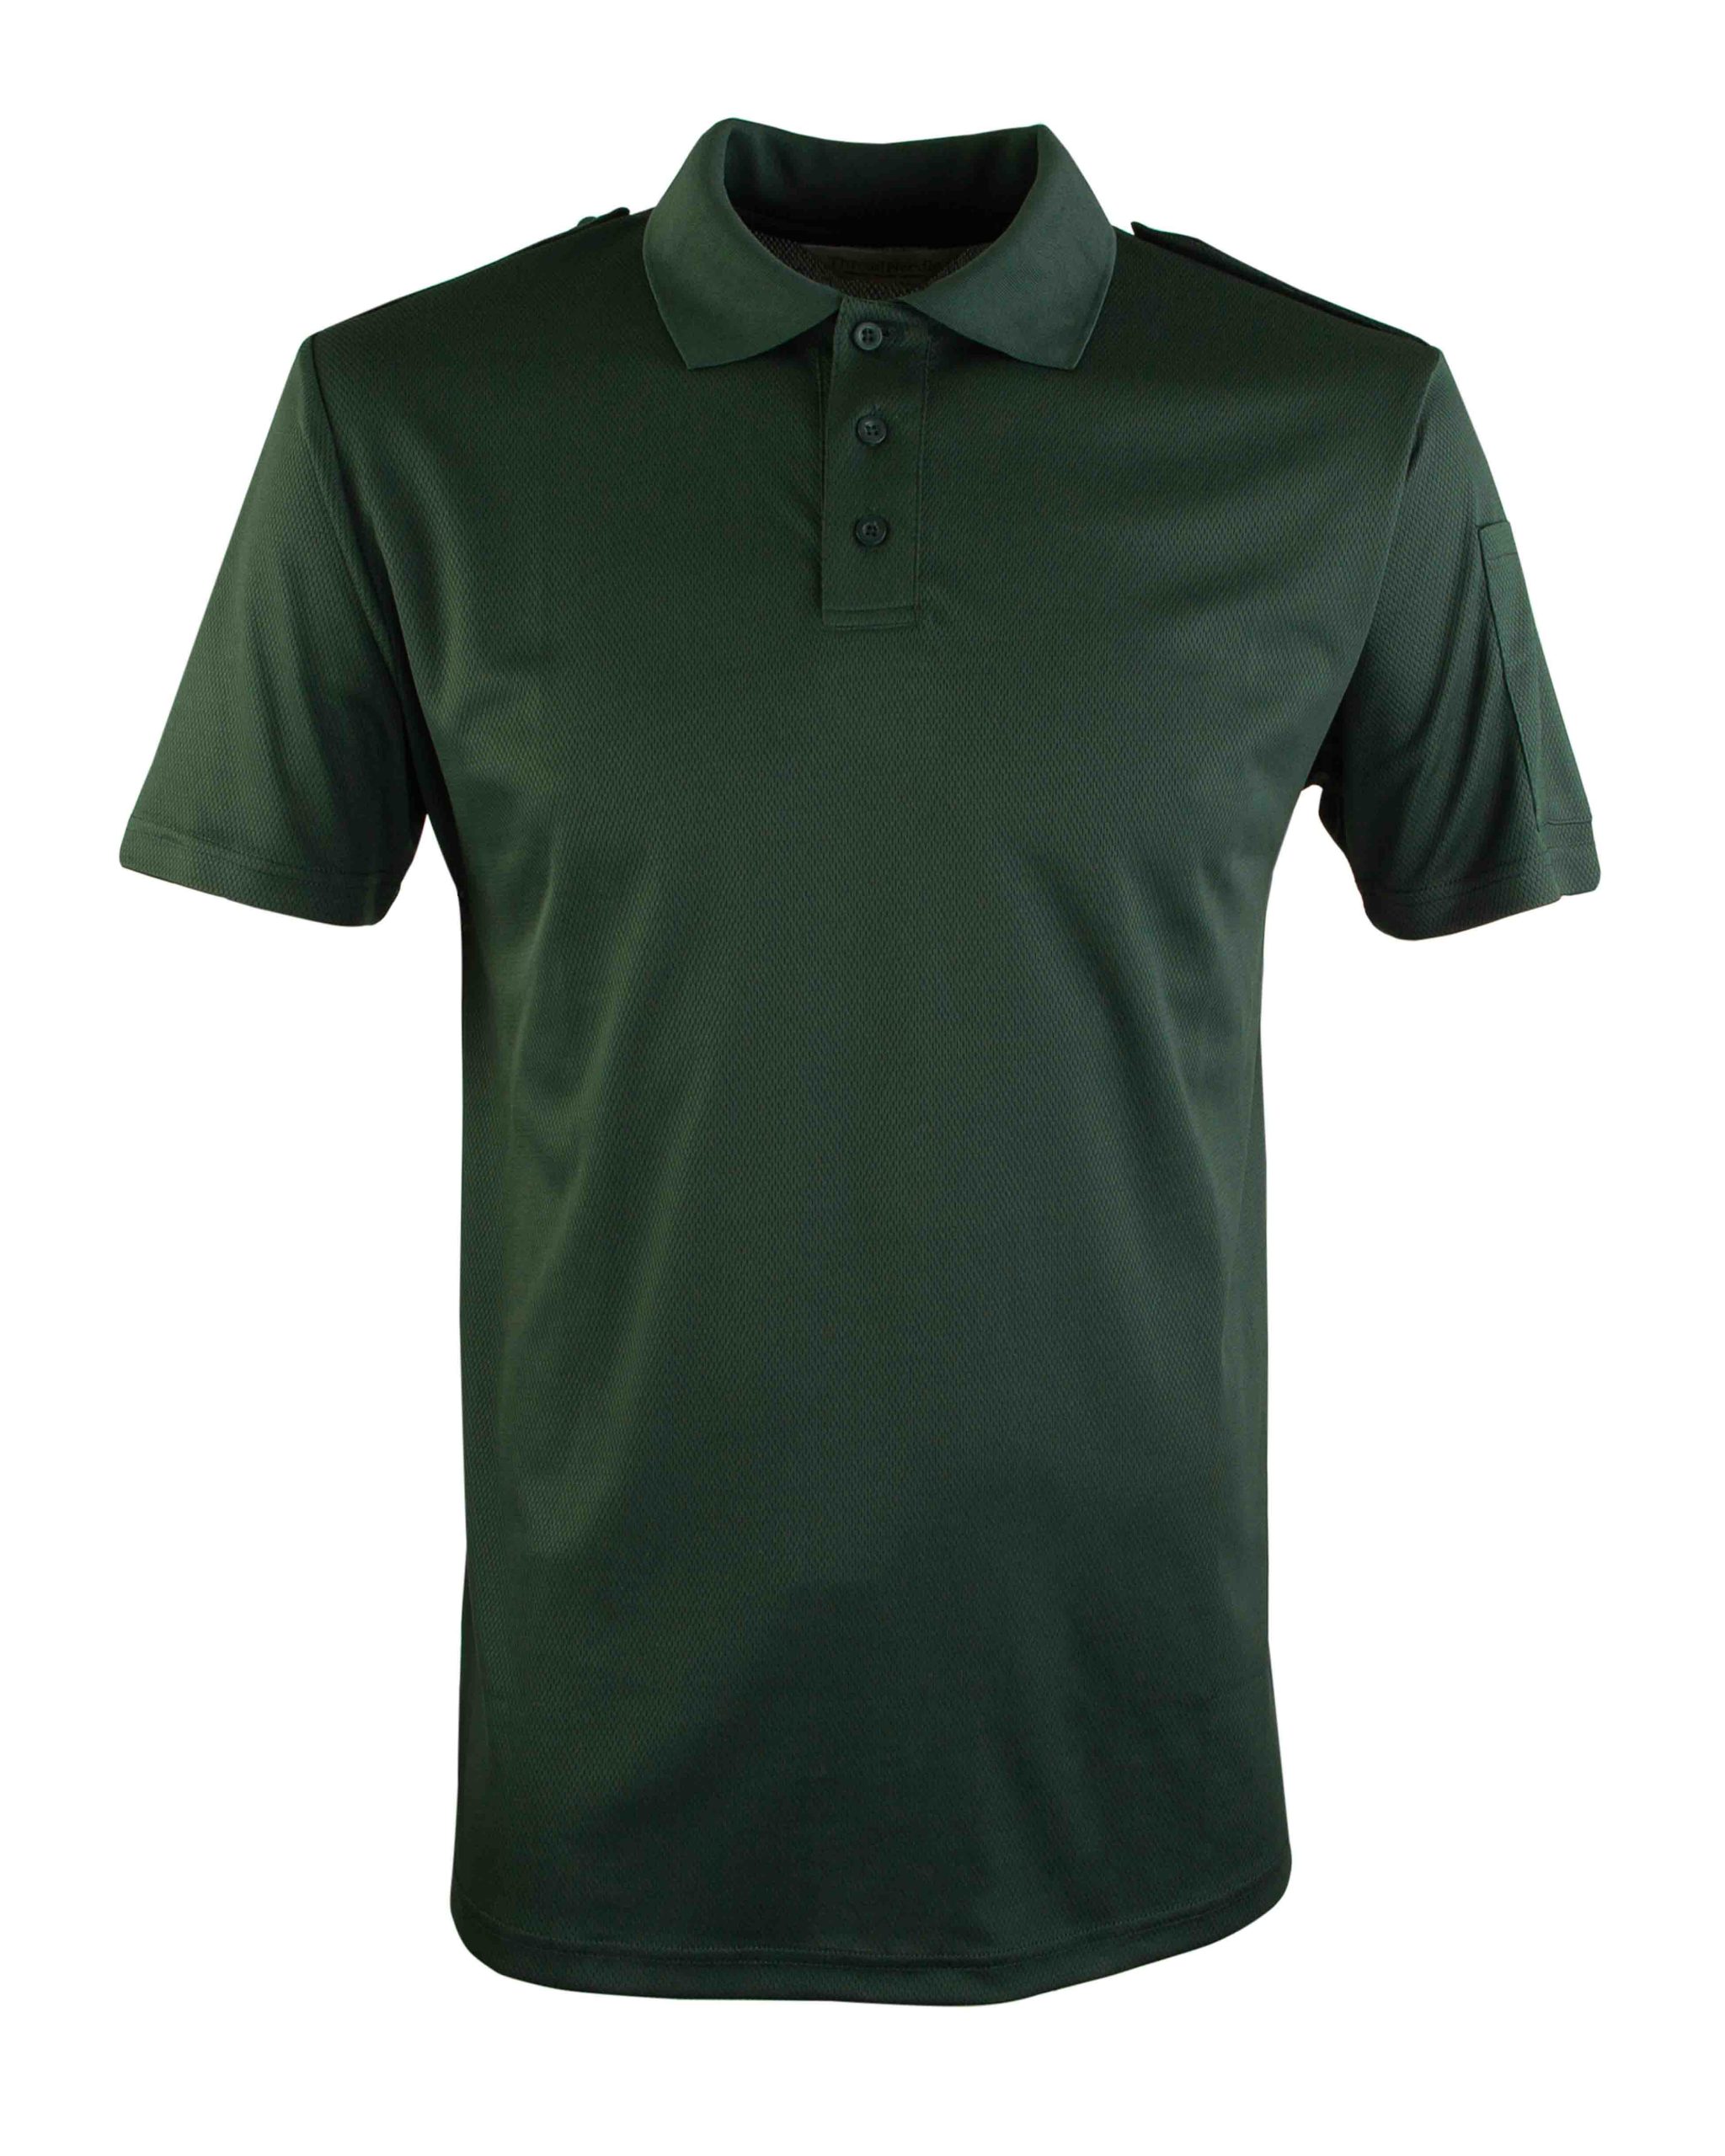 Wicking Polo Shirt | Sugdens | Corporate Clothing, Uniforms and Workwear